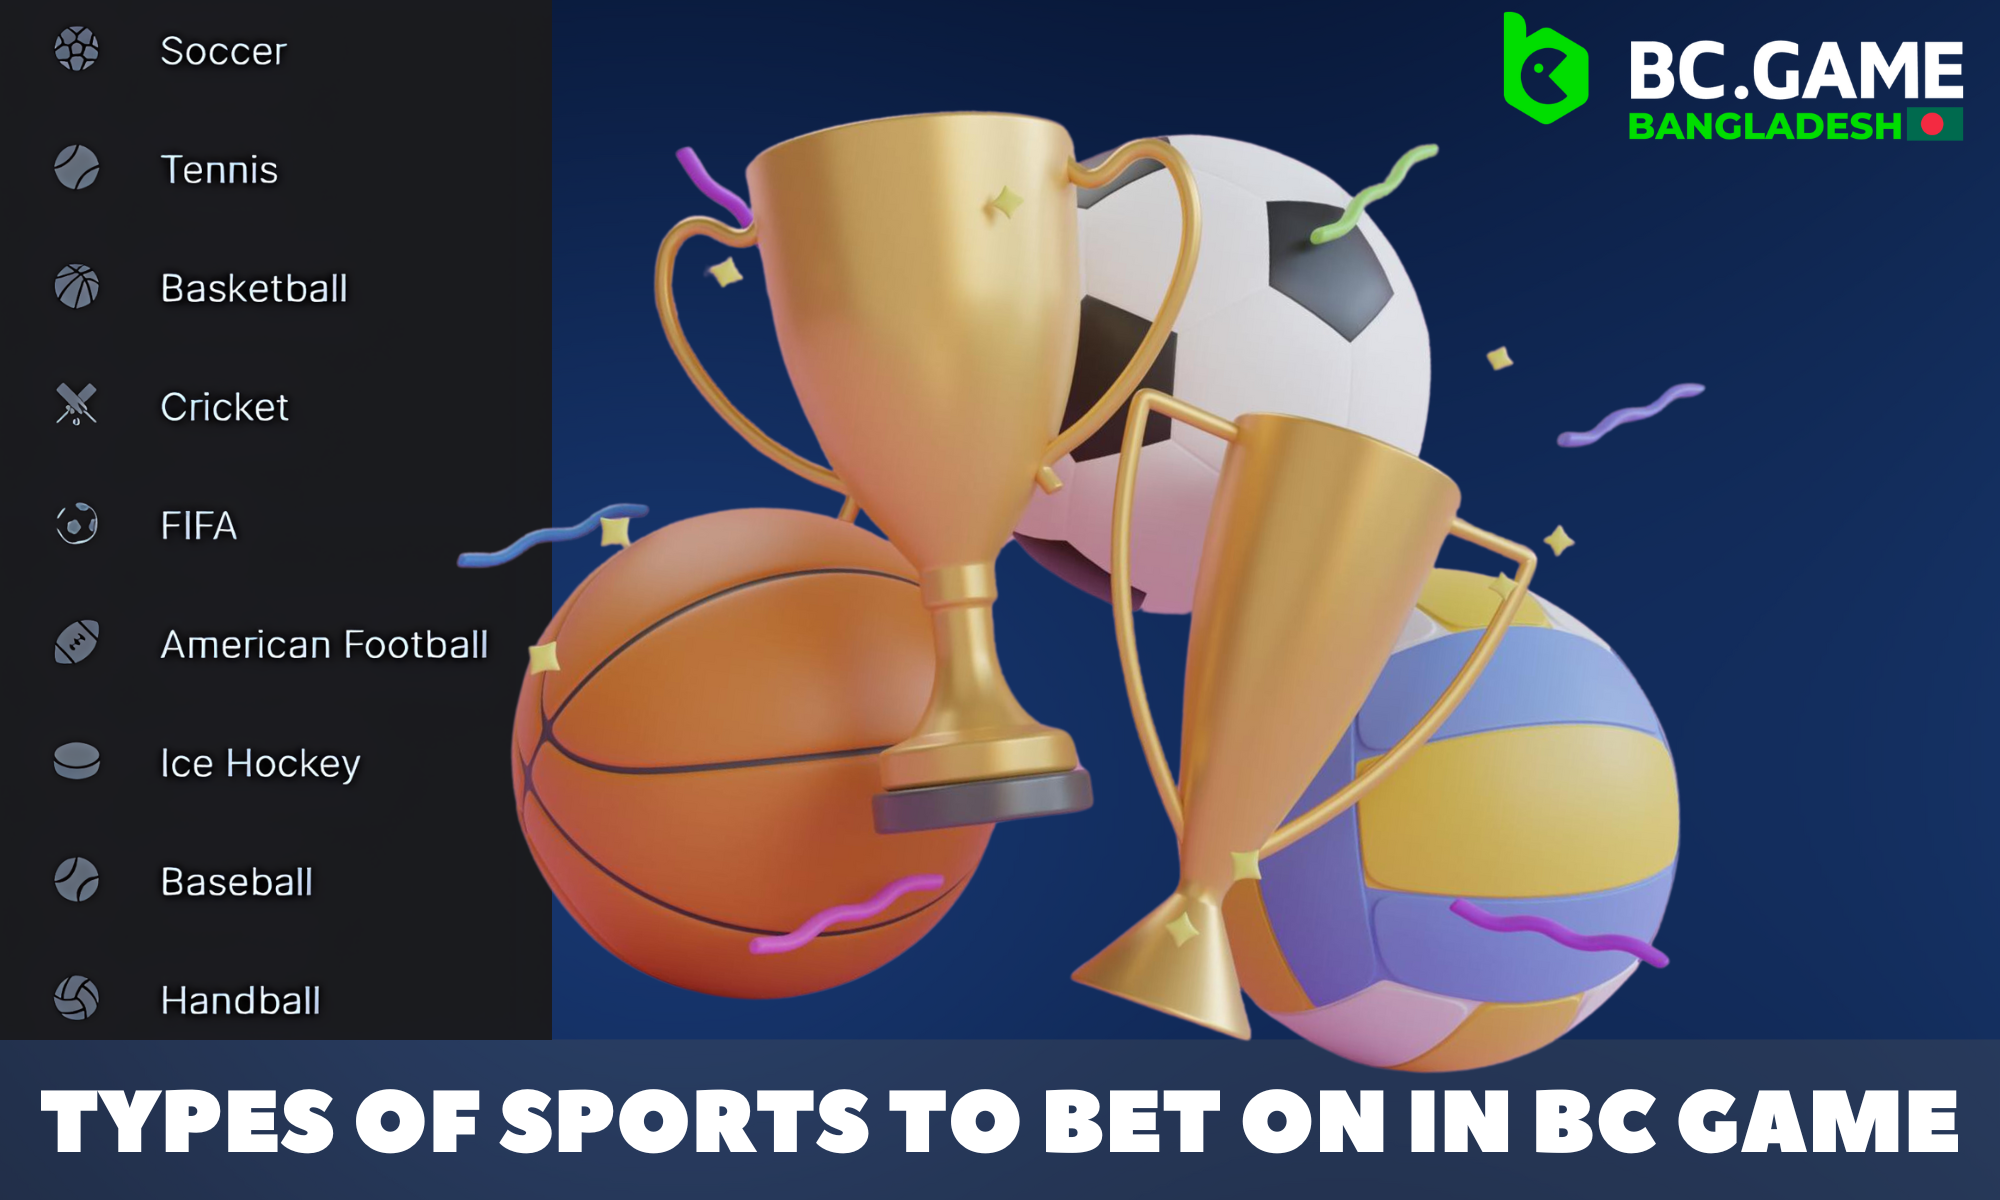 The BC Game website has two main betting categories located in the top menu bar: "Sports" and "Racing".